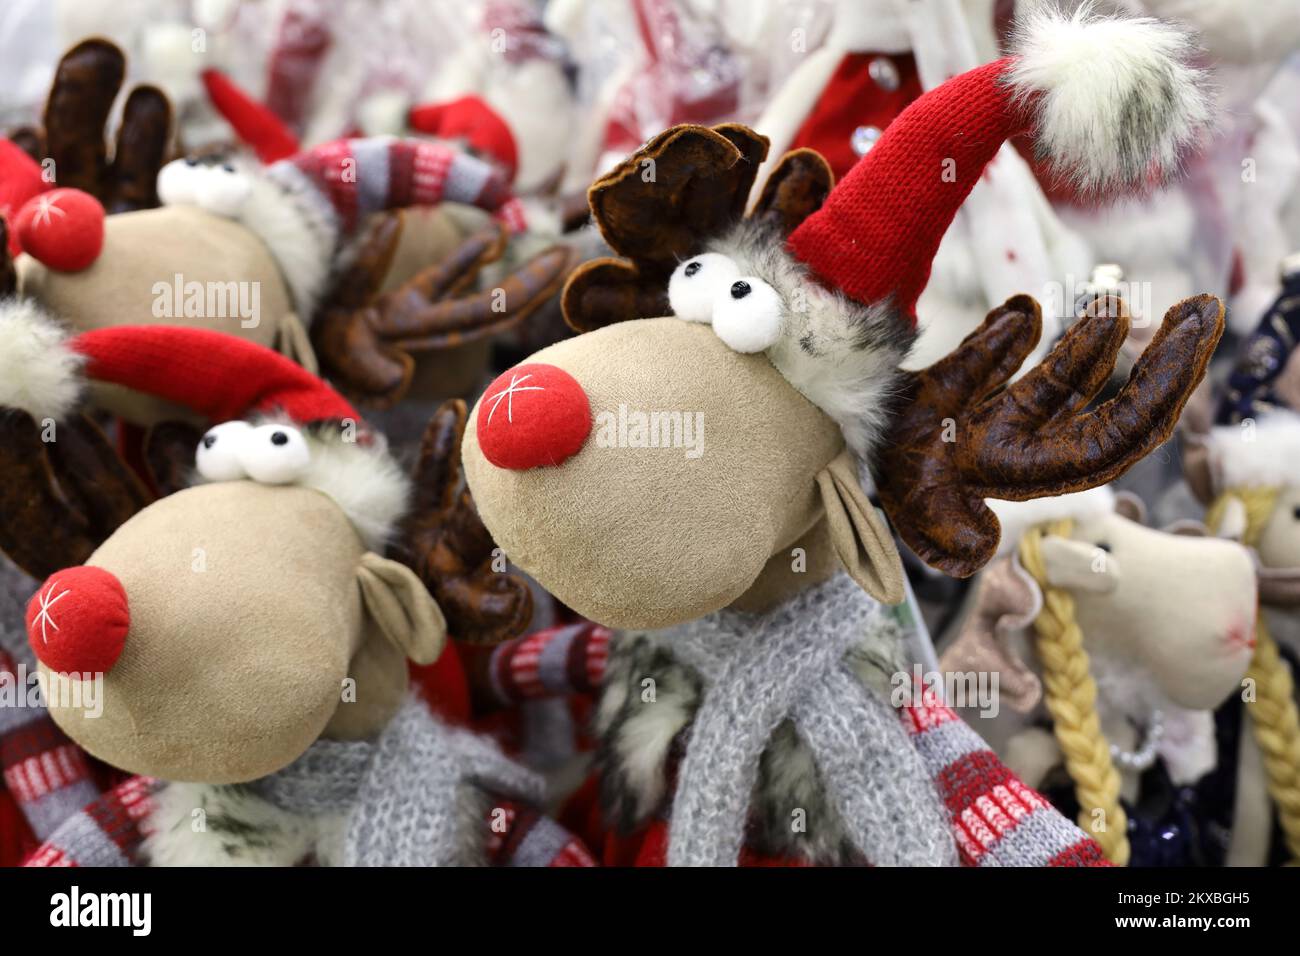 Christmas toys in a store. Stuffed deer figures, New Year gifts for winter holidays Stock Photo